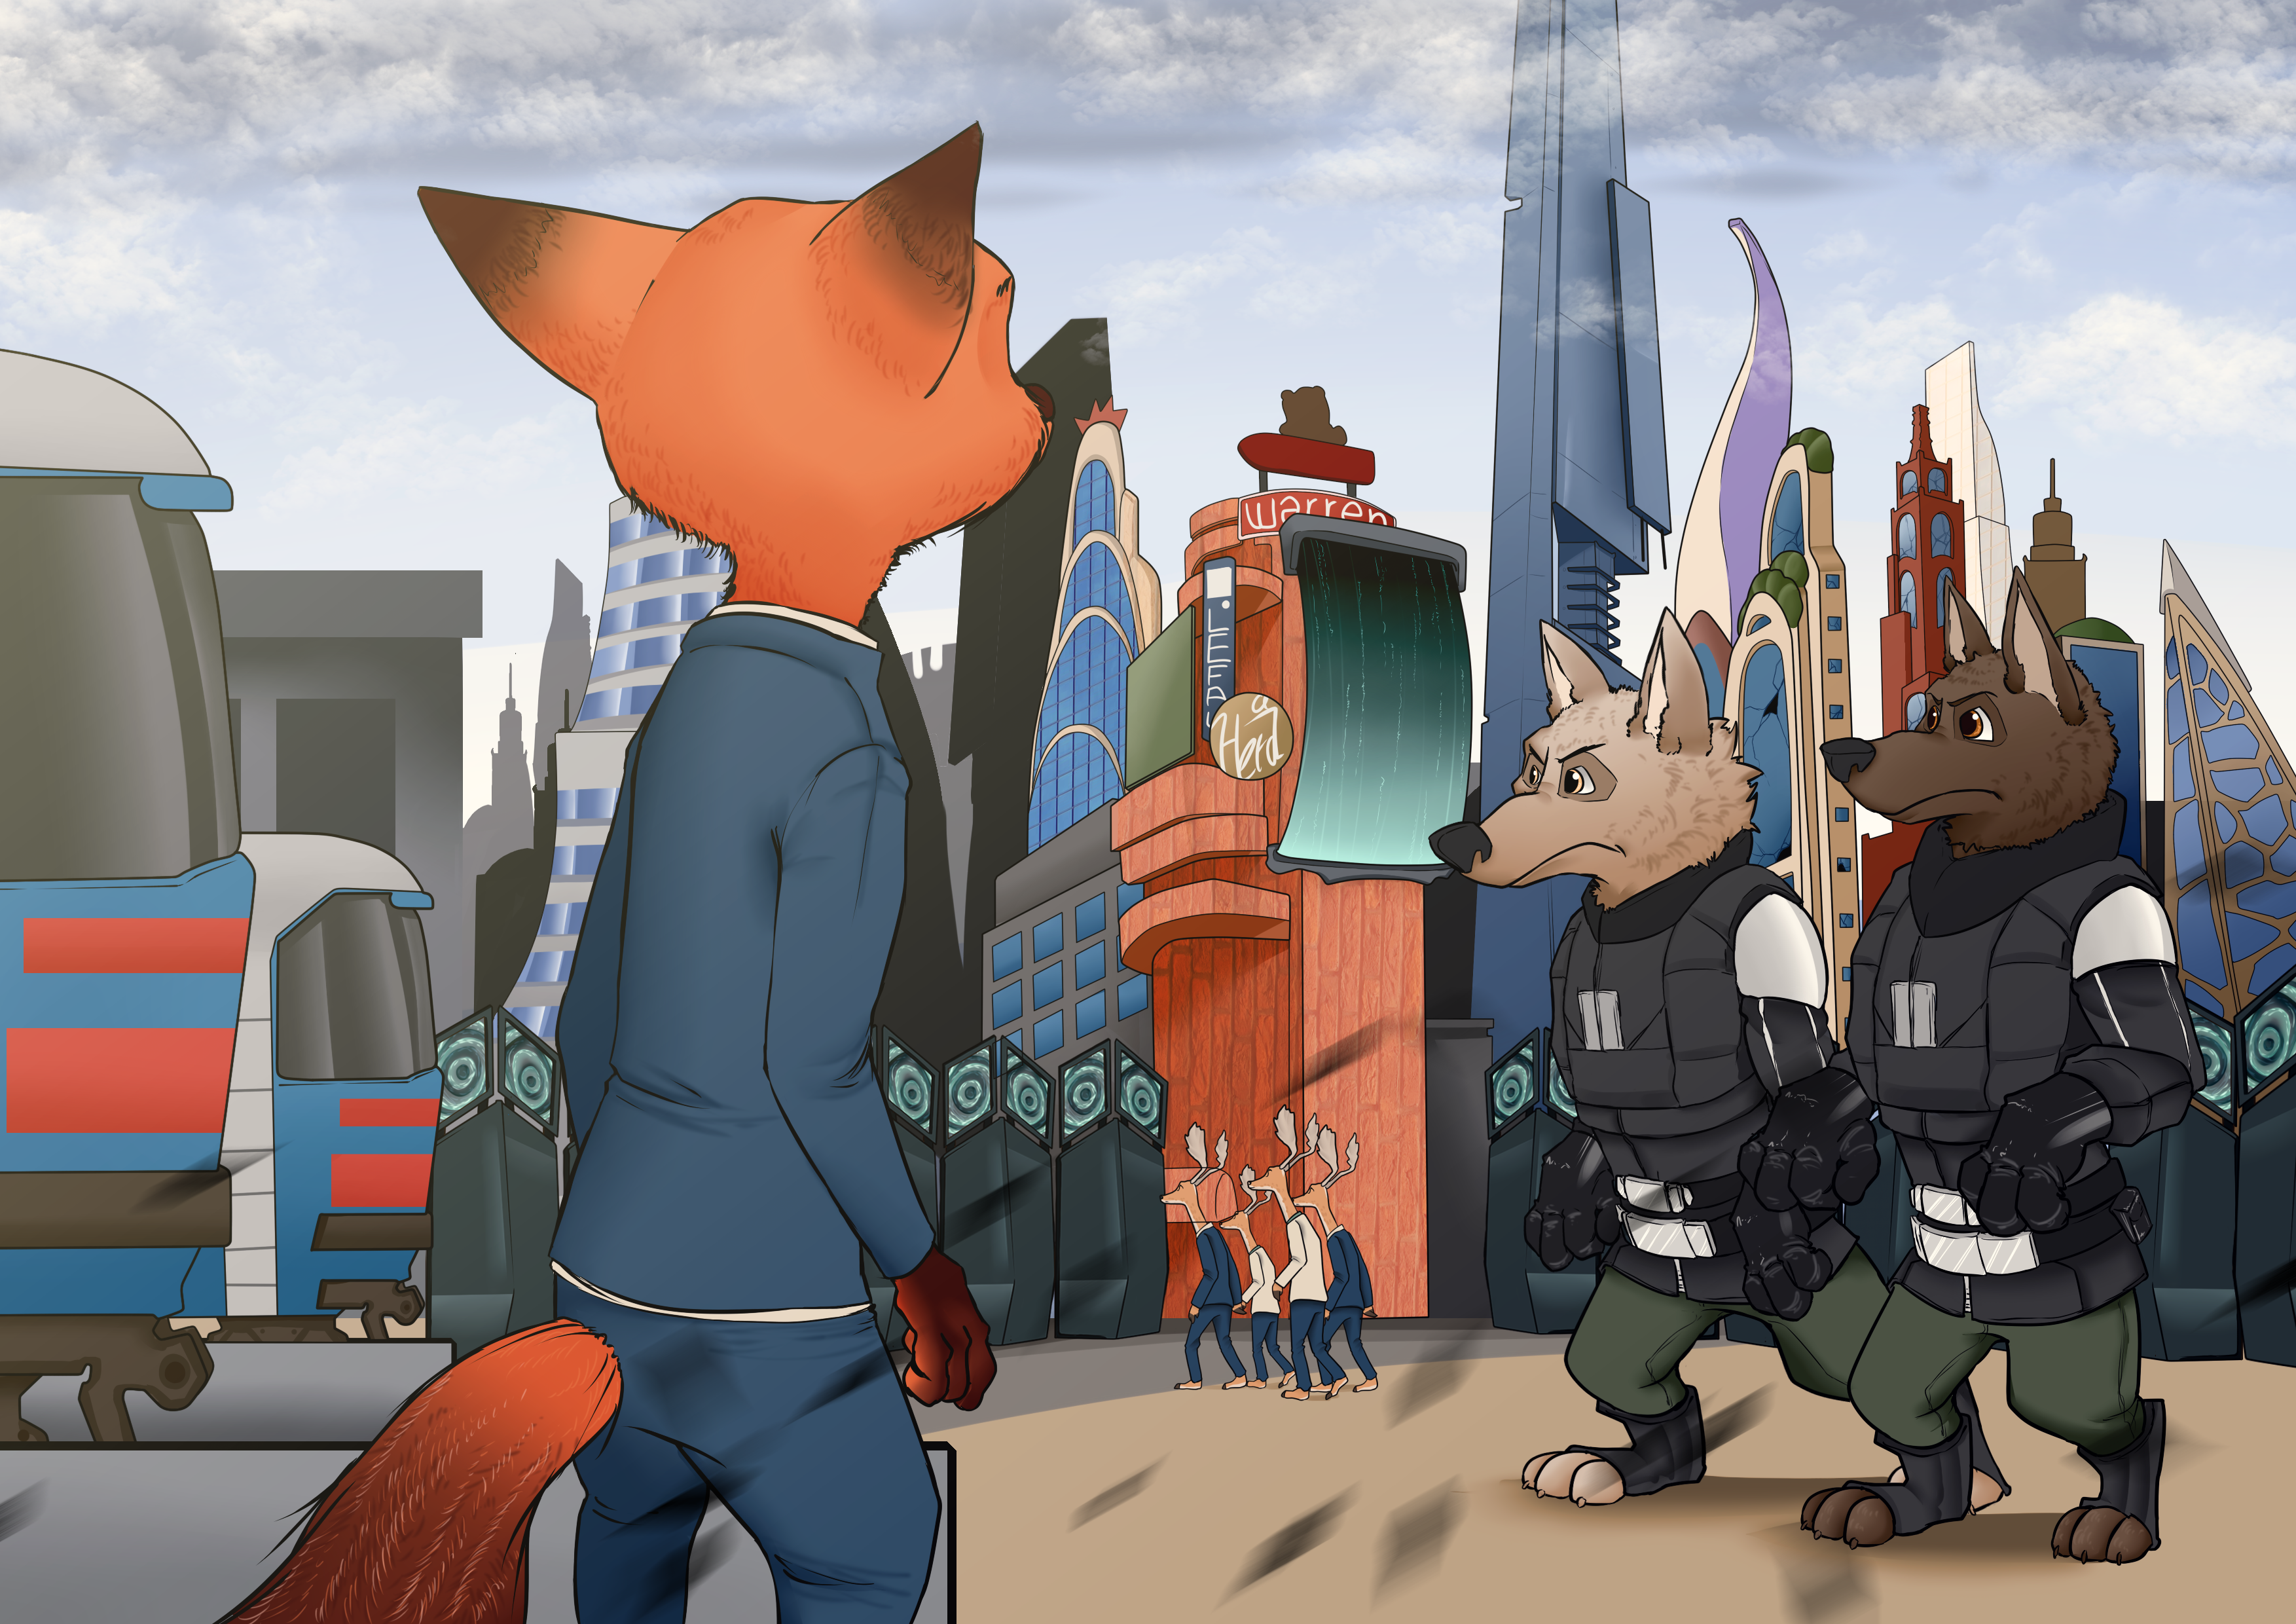 Zootopia (2016) by sithlord38 on DeviantArt